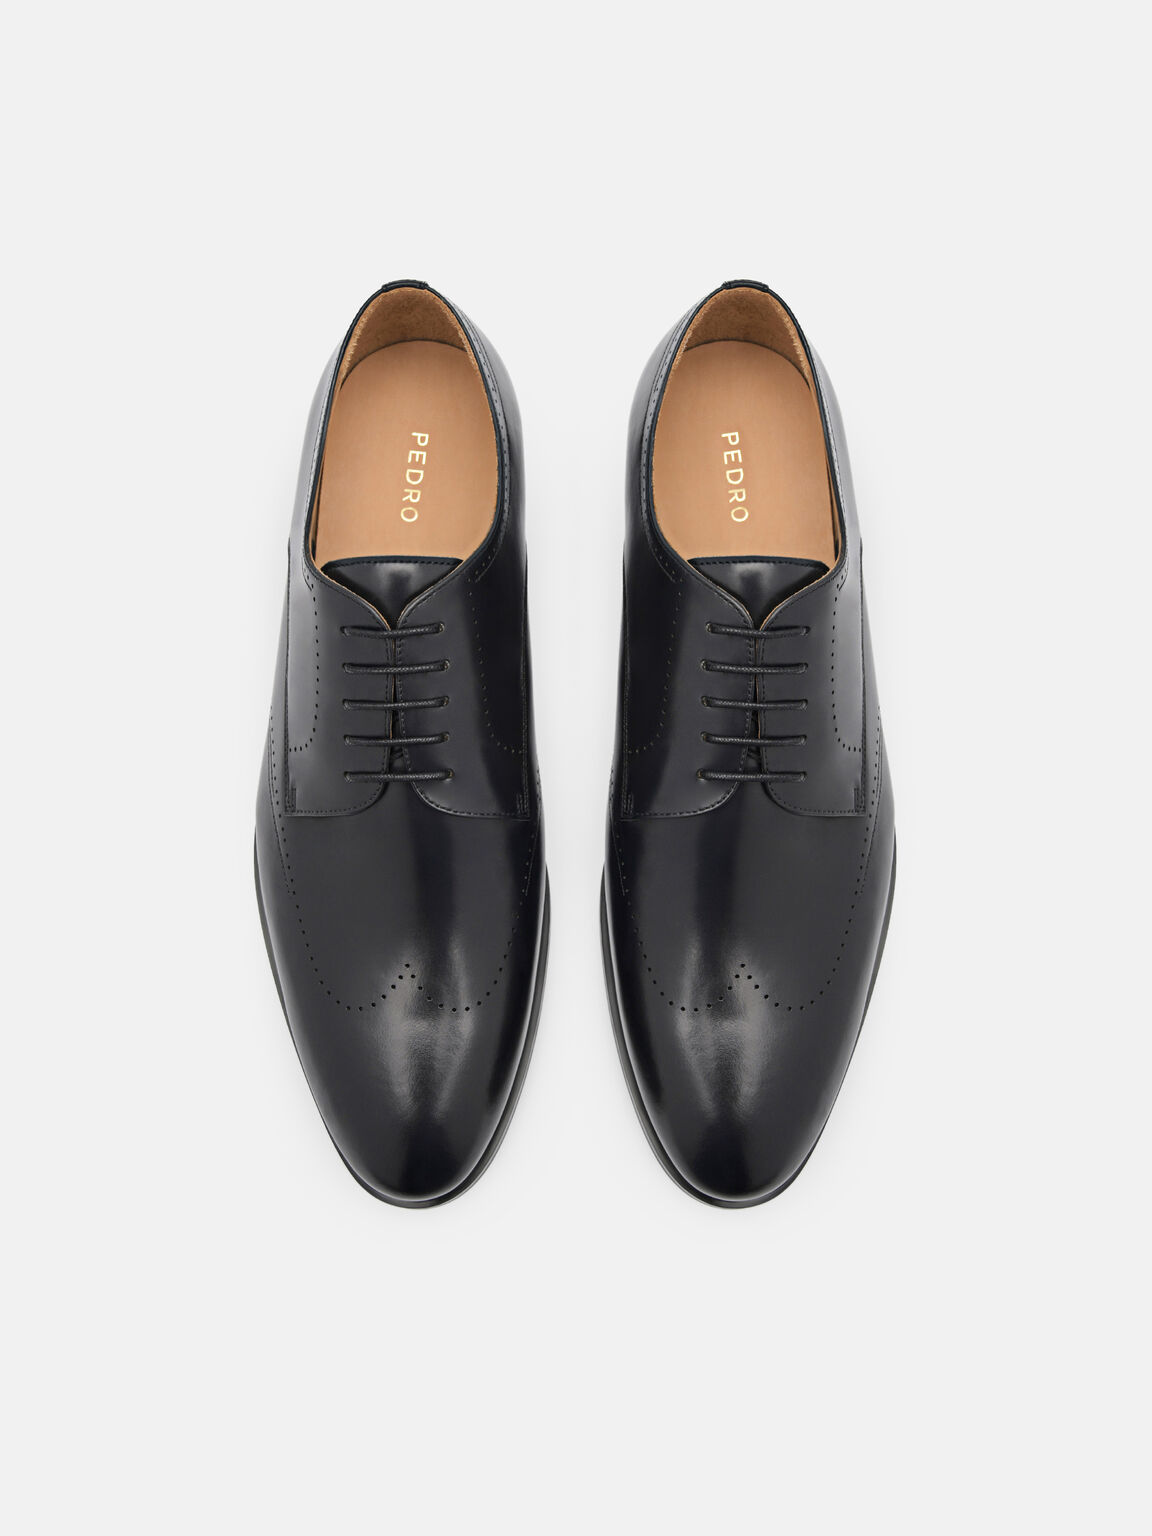 Leather Brogue Derby Shoes, Black